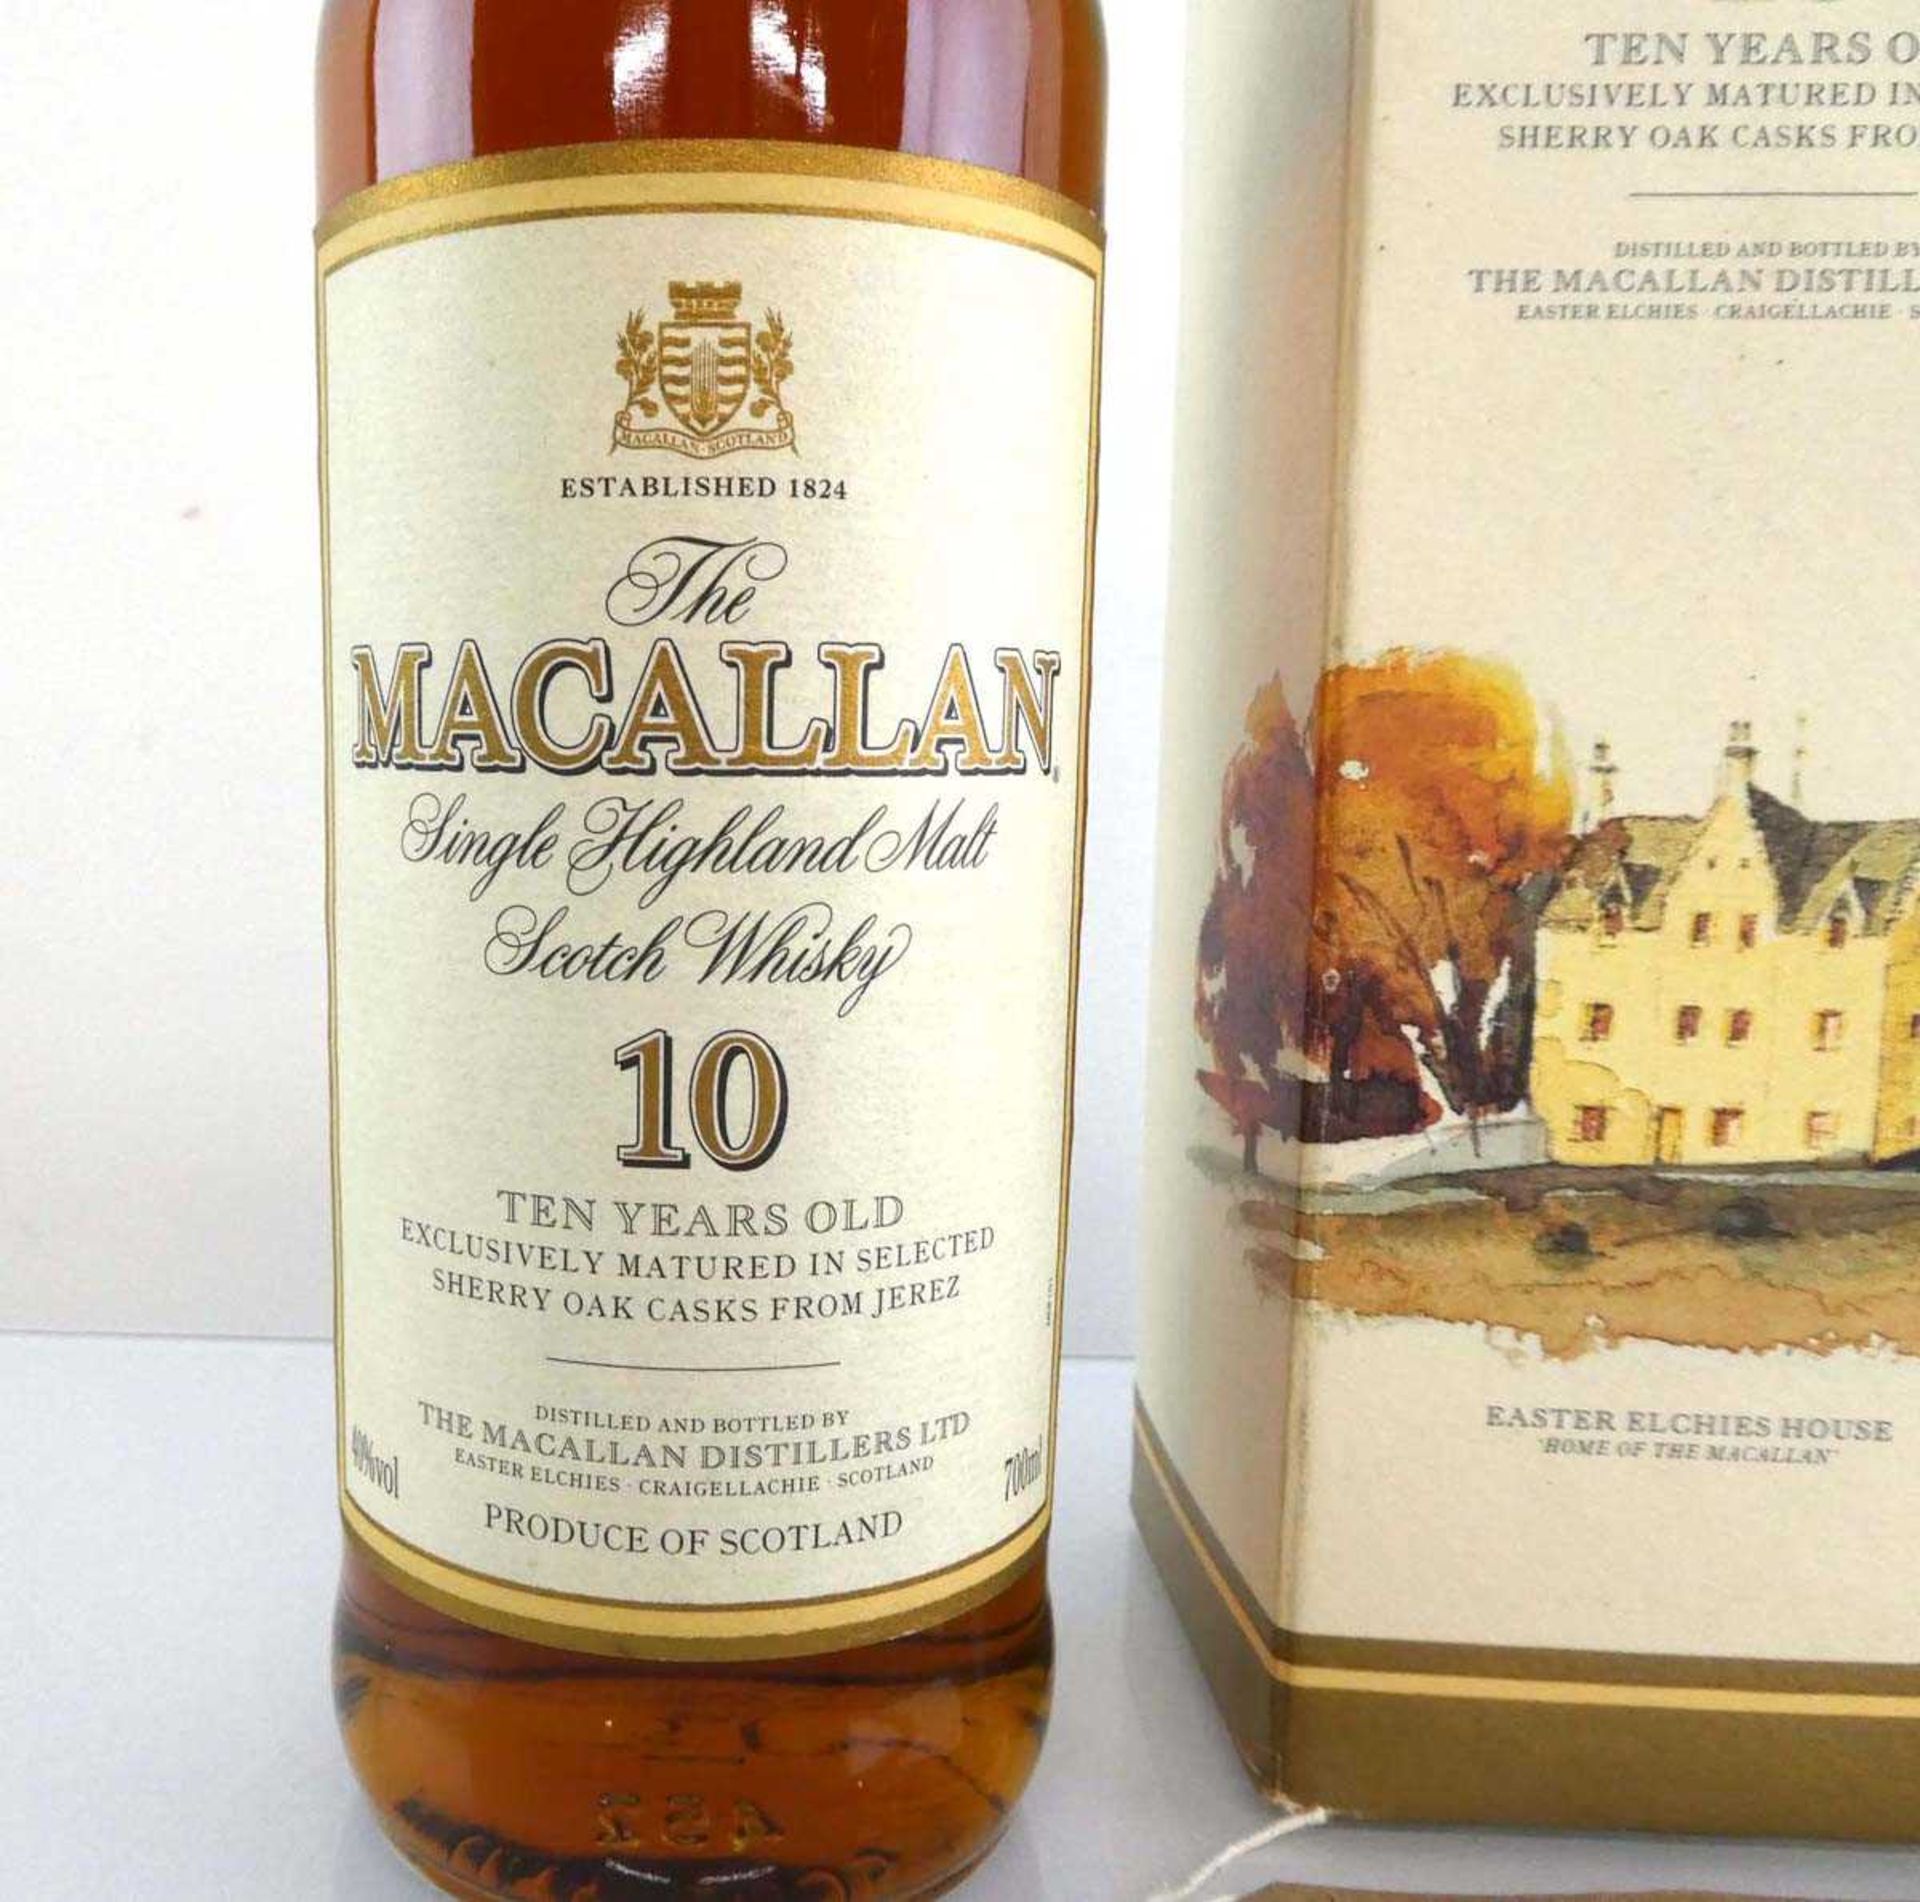 +VAT A bottle of The MACALLAN 10 year old "Easter Elchies House" Single Highland Malt Scotch - Image 4 of 6